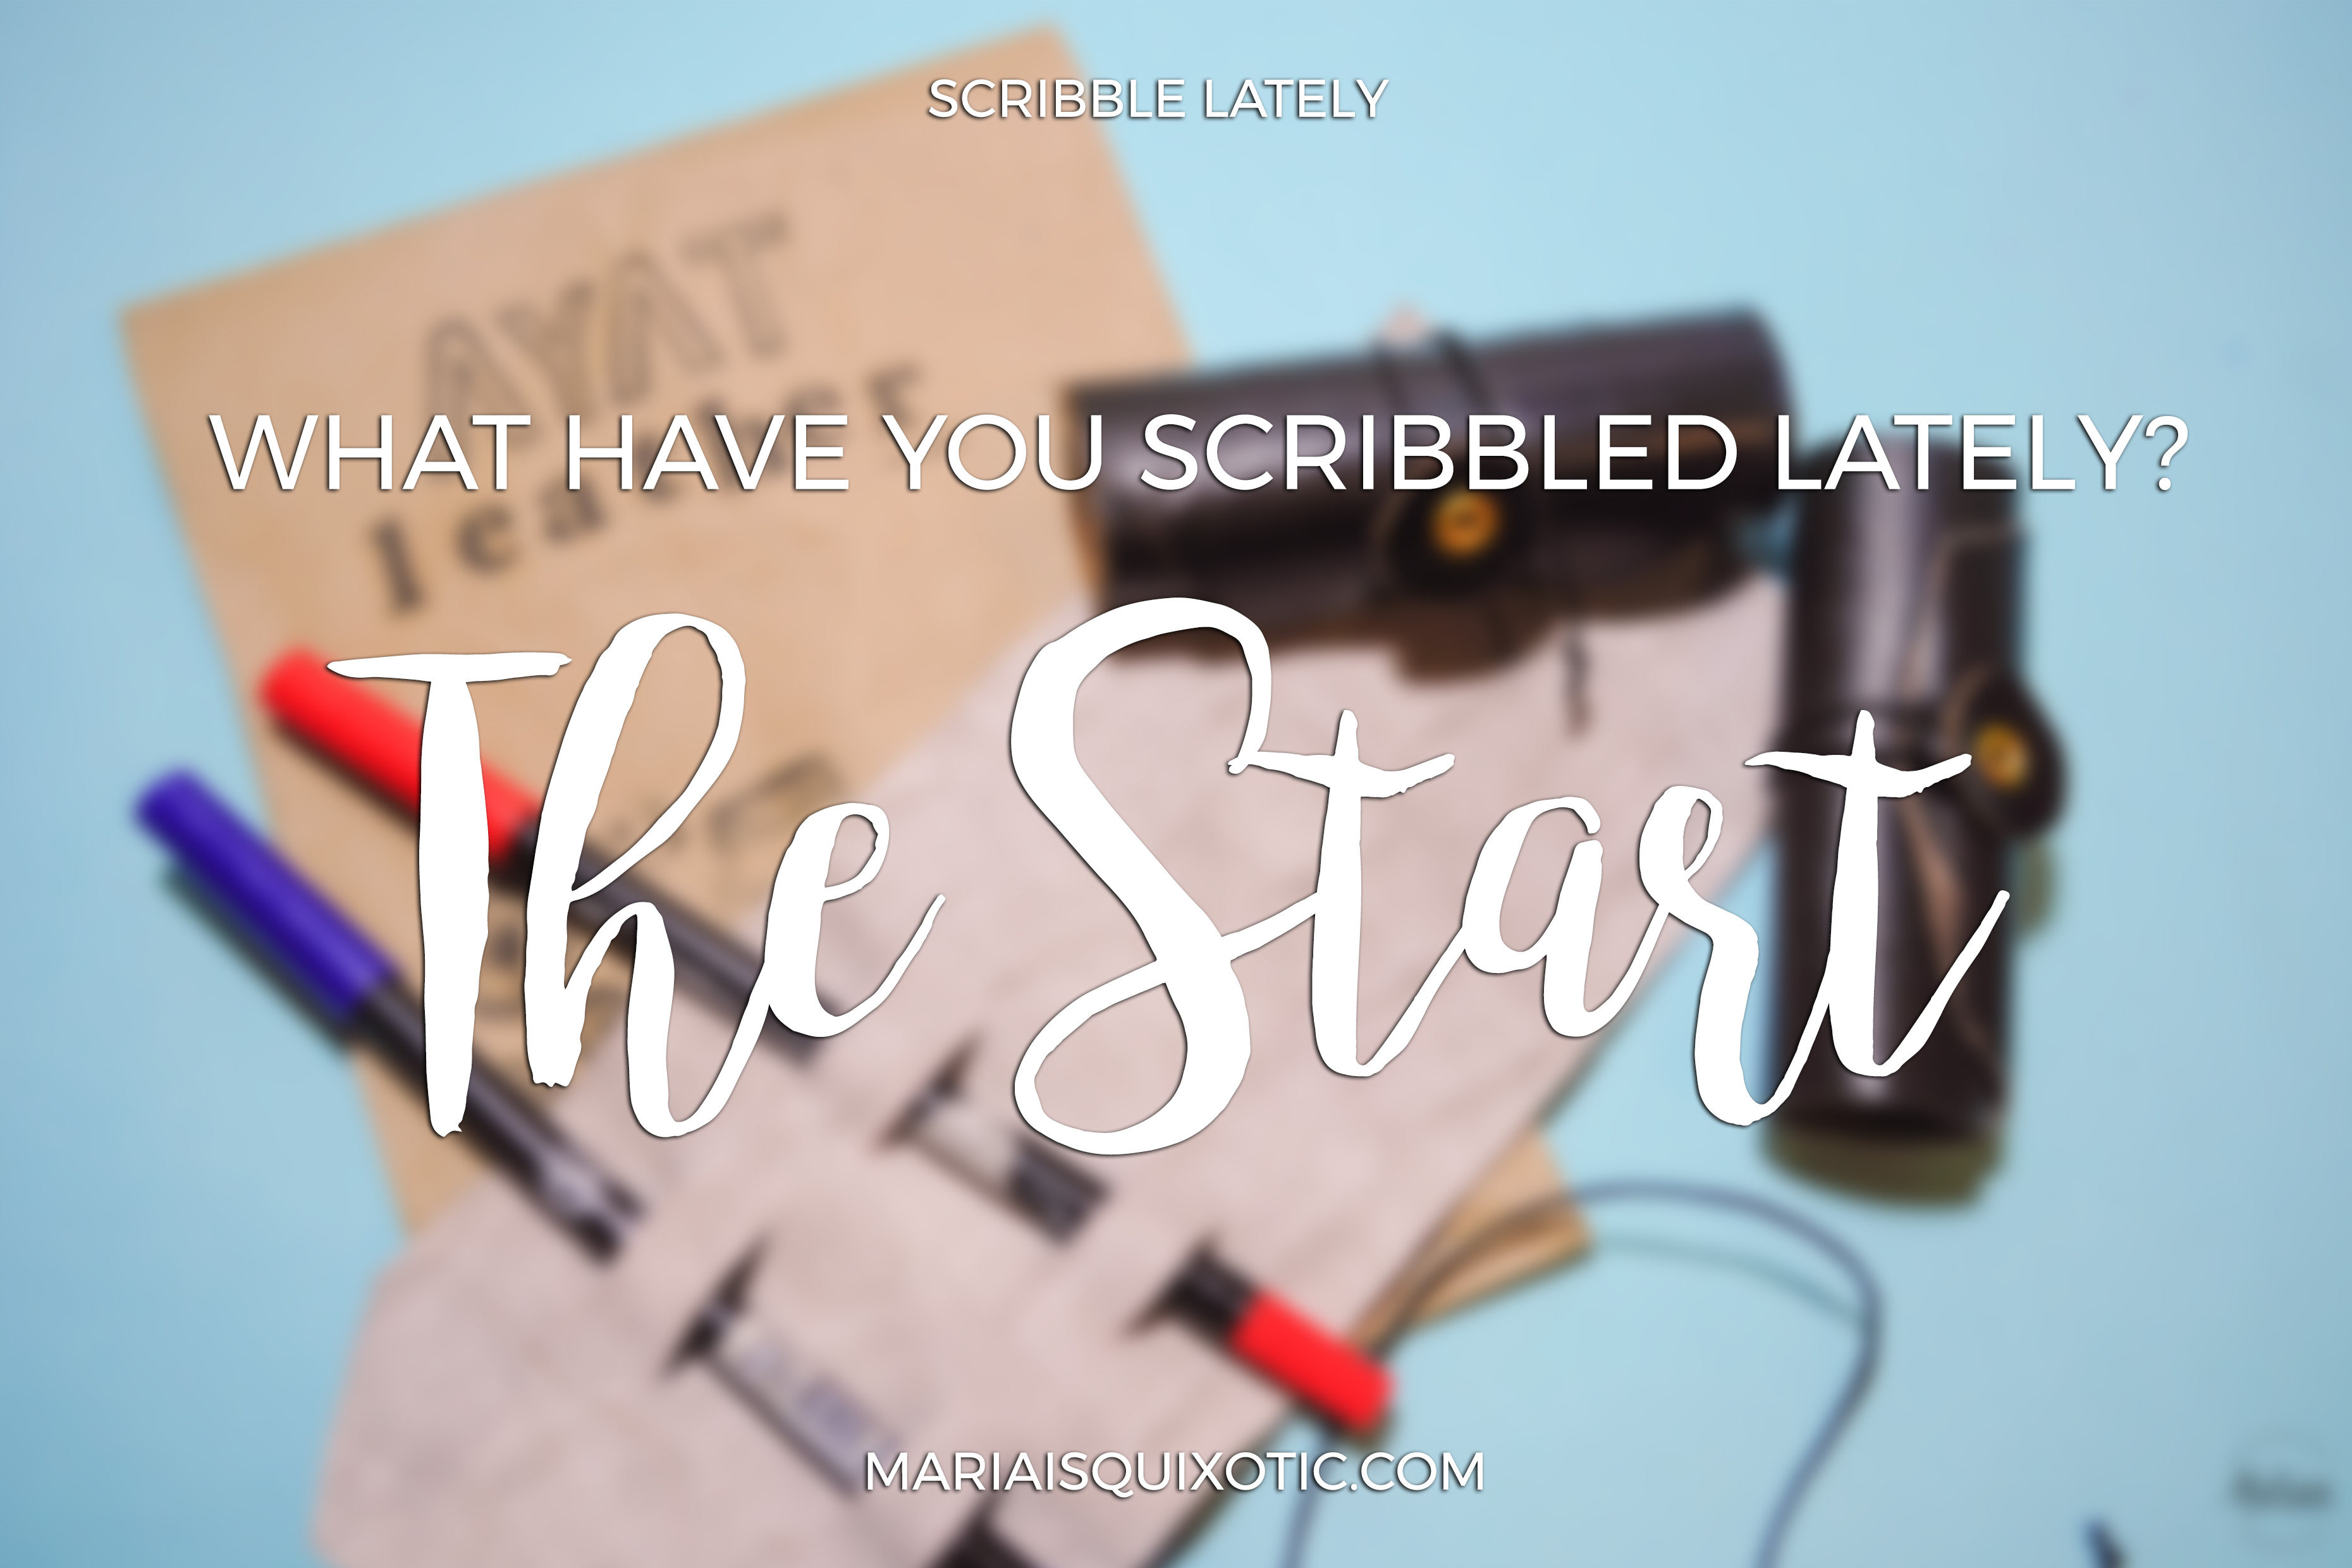 Scribble Lately: The Start